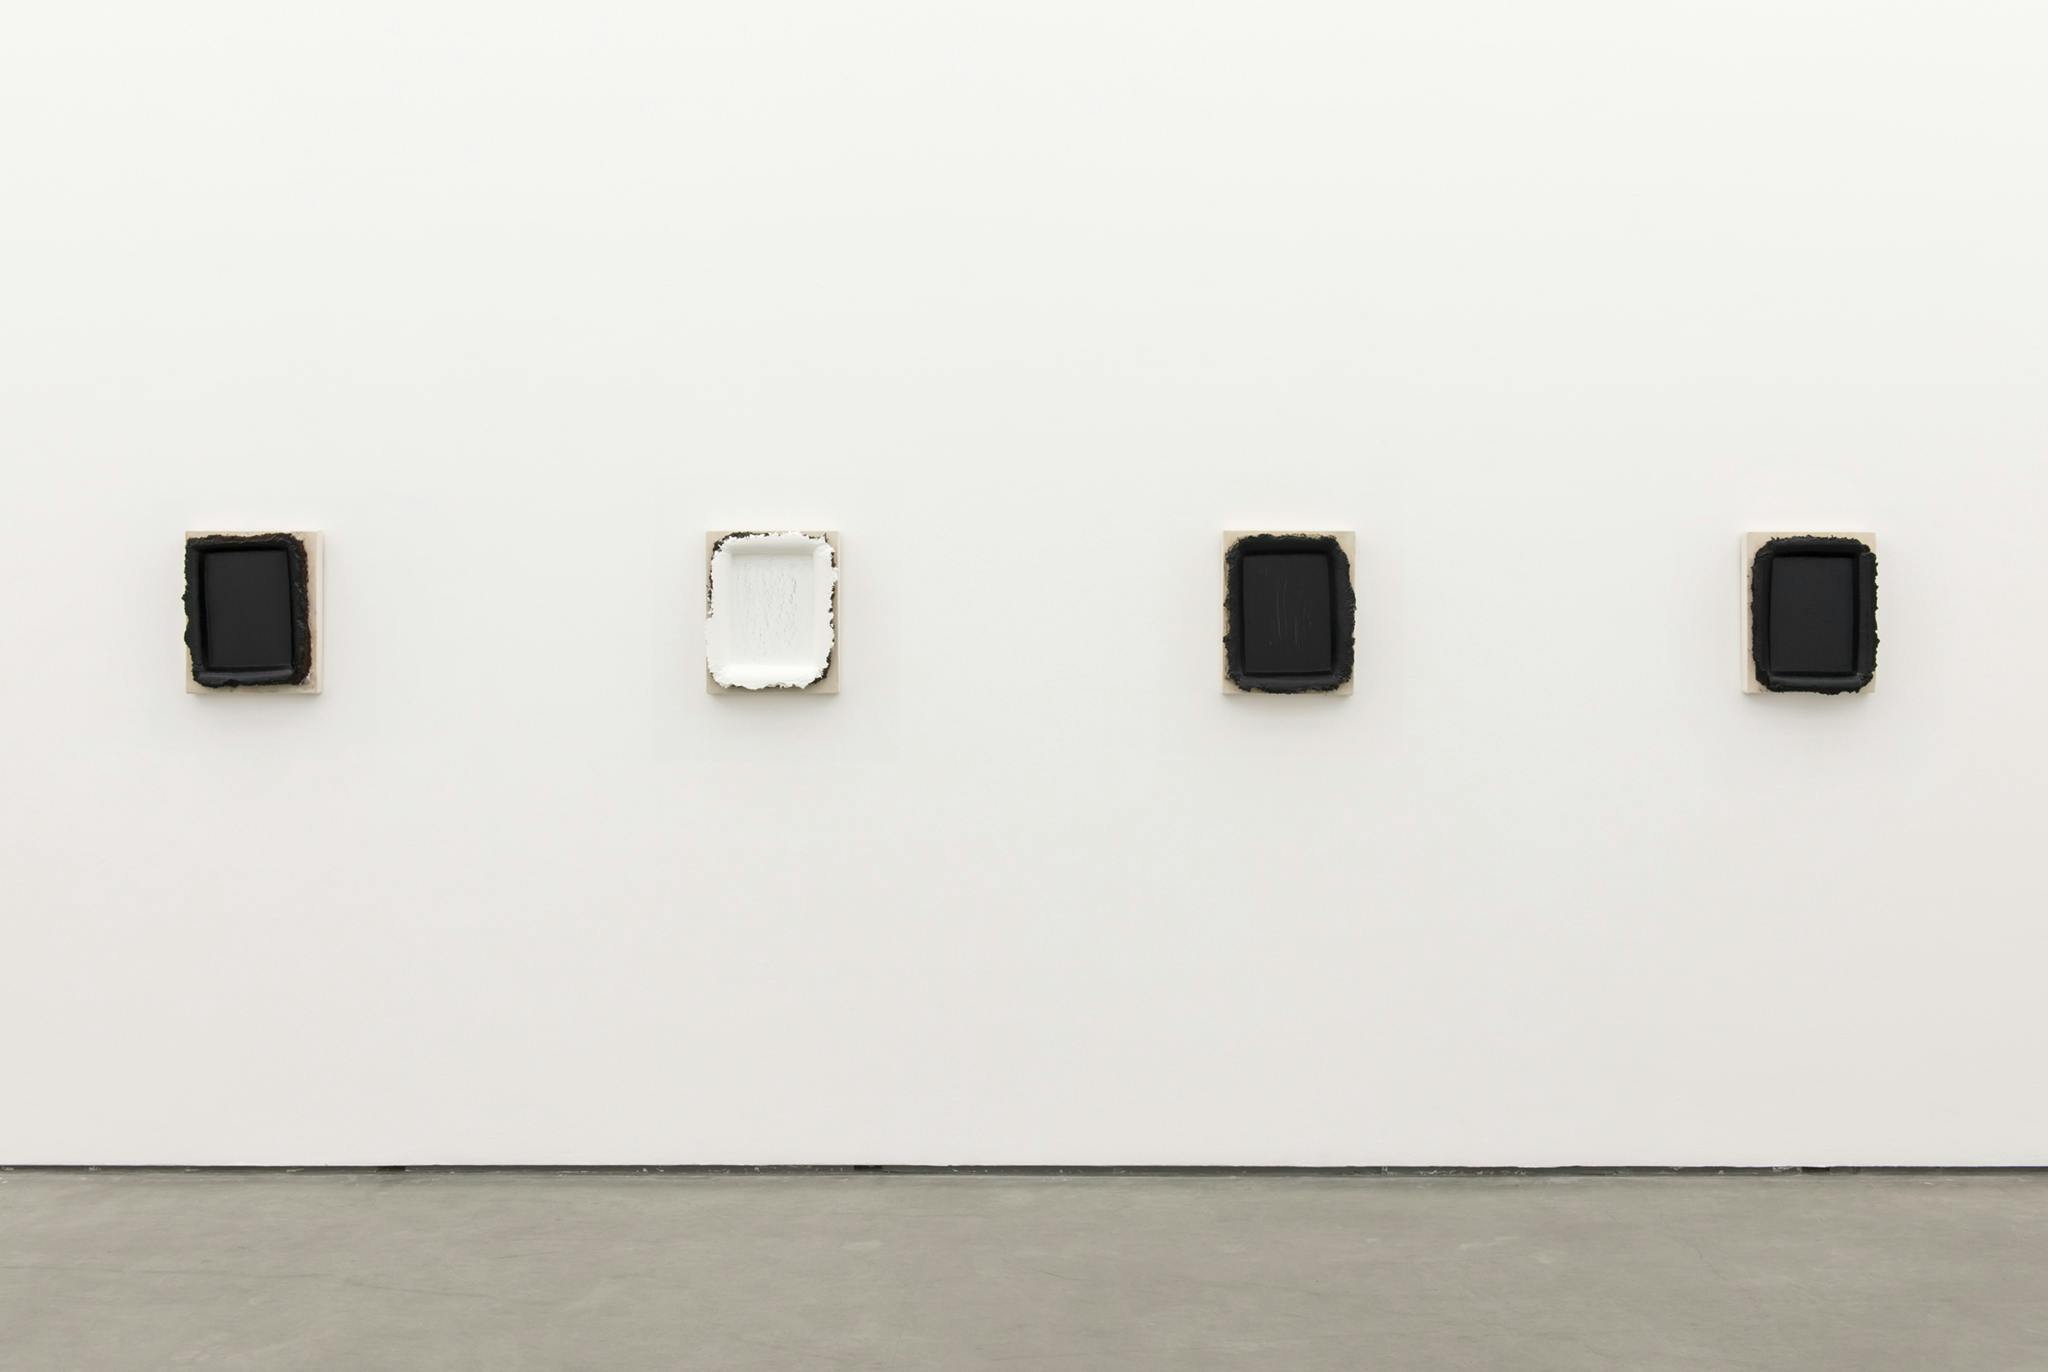 Four paintings hang on the wall of a gallery space. Three of them are black and one of them is white. The minimalist, rectangular paintings take on a sculptural form with thick layers of oil paint. 